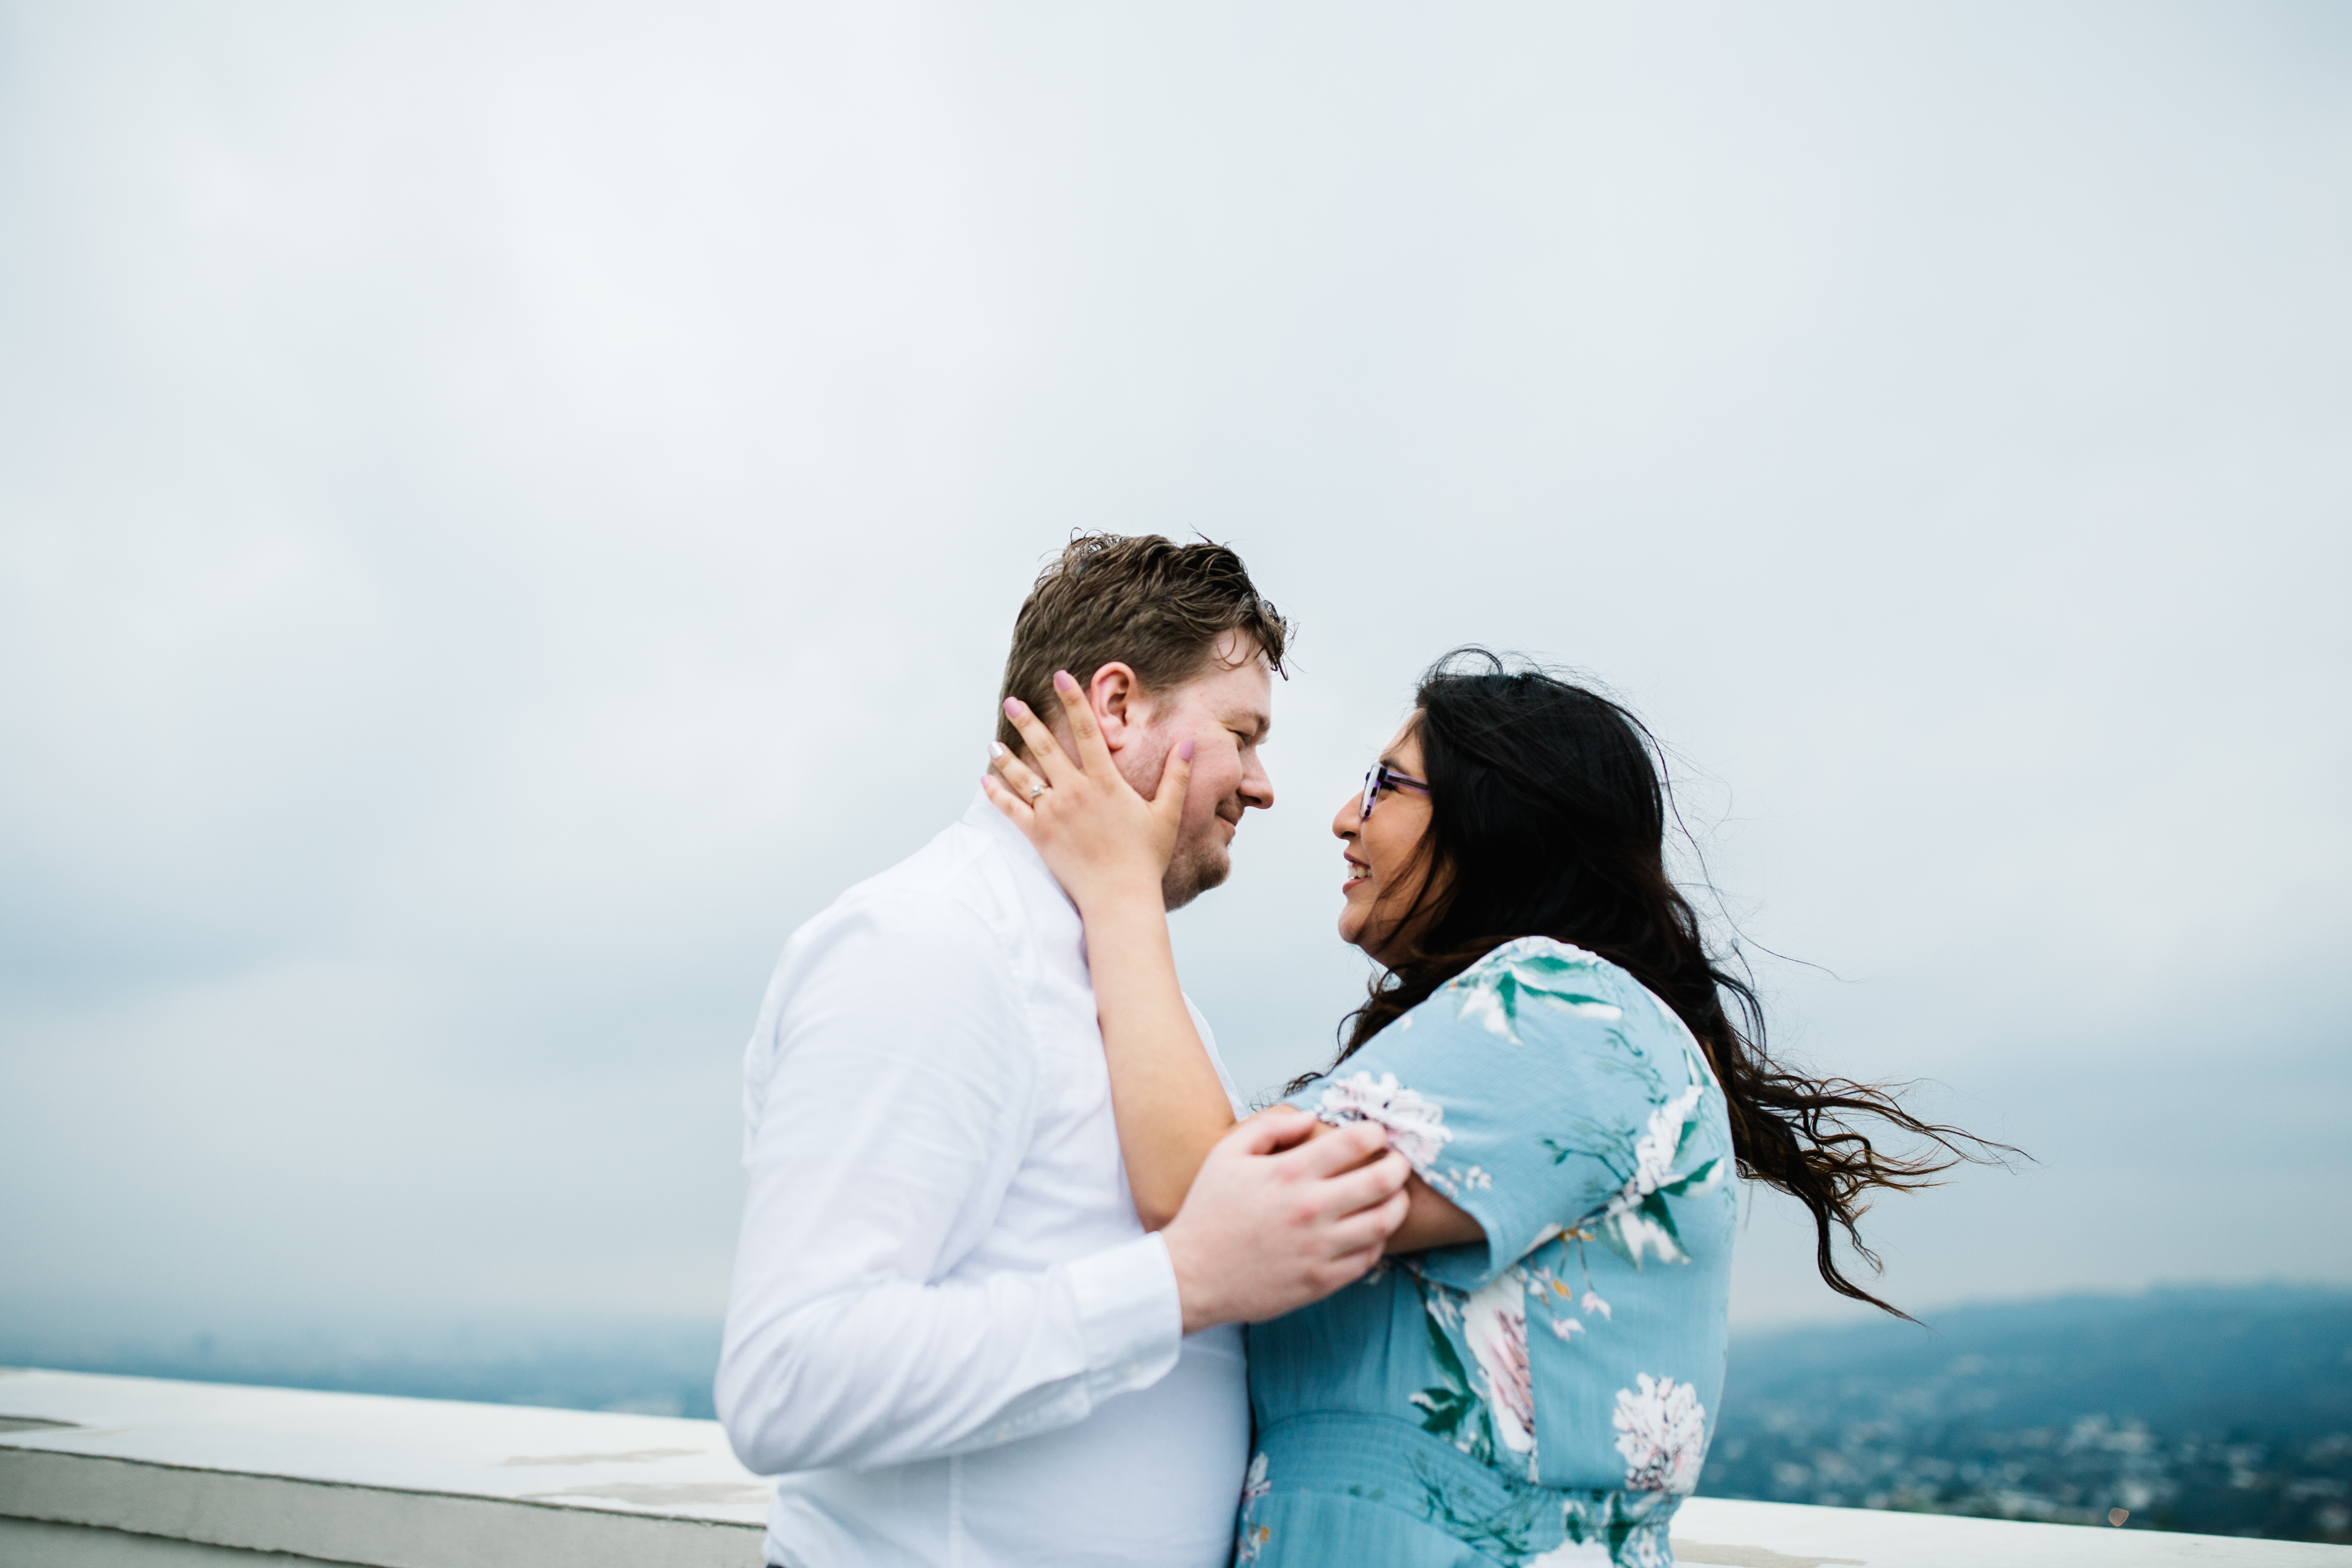 griffith observatory engagement photos Couple hold each other at Griffith Observatory in Los Angeles , California.